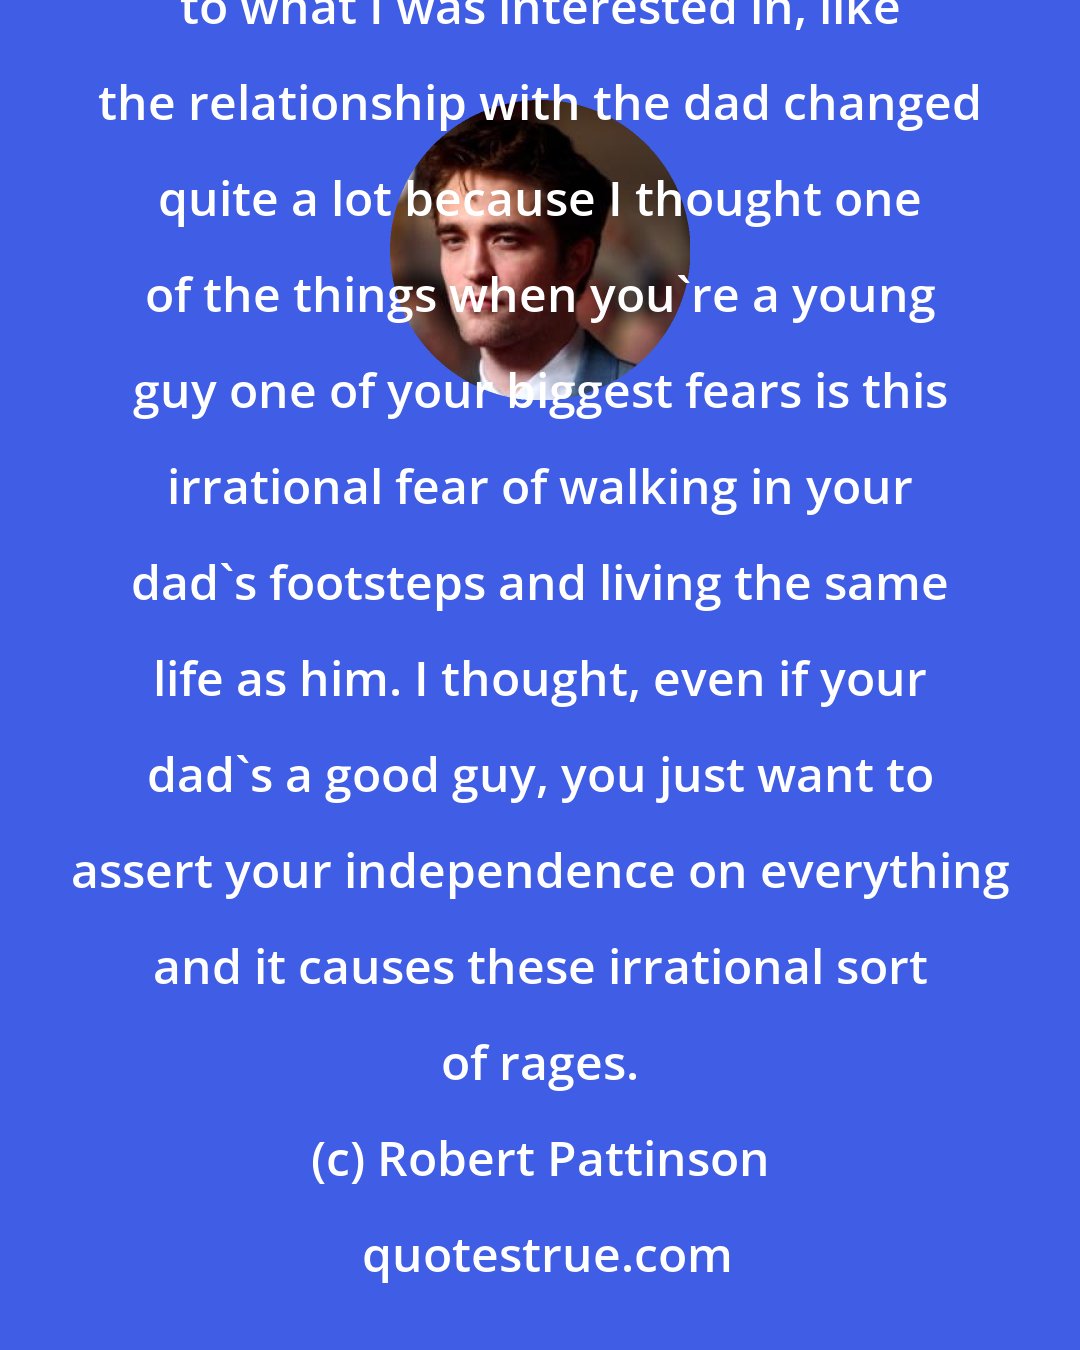 Robert Pattinson: The script changed so much over seven months and just had loads and loads of re-writes. I tried to tailor things to what I was interested in, like the relationship with the dad changed quite a lot because I thought one of the things when you're a young guy one of your biggest fears is this irrational fear of walking in your dad's footsteps and living the same life as him. I thought, even if your dad's a good guy, you just want to assert your independence on everything and it causes these irrational sort of rages.